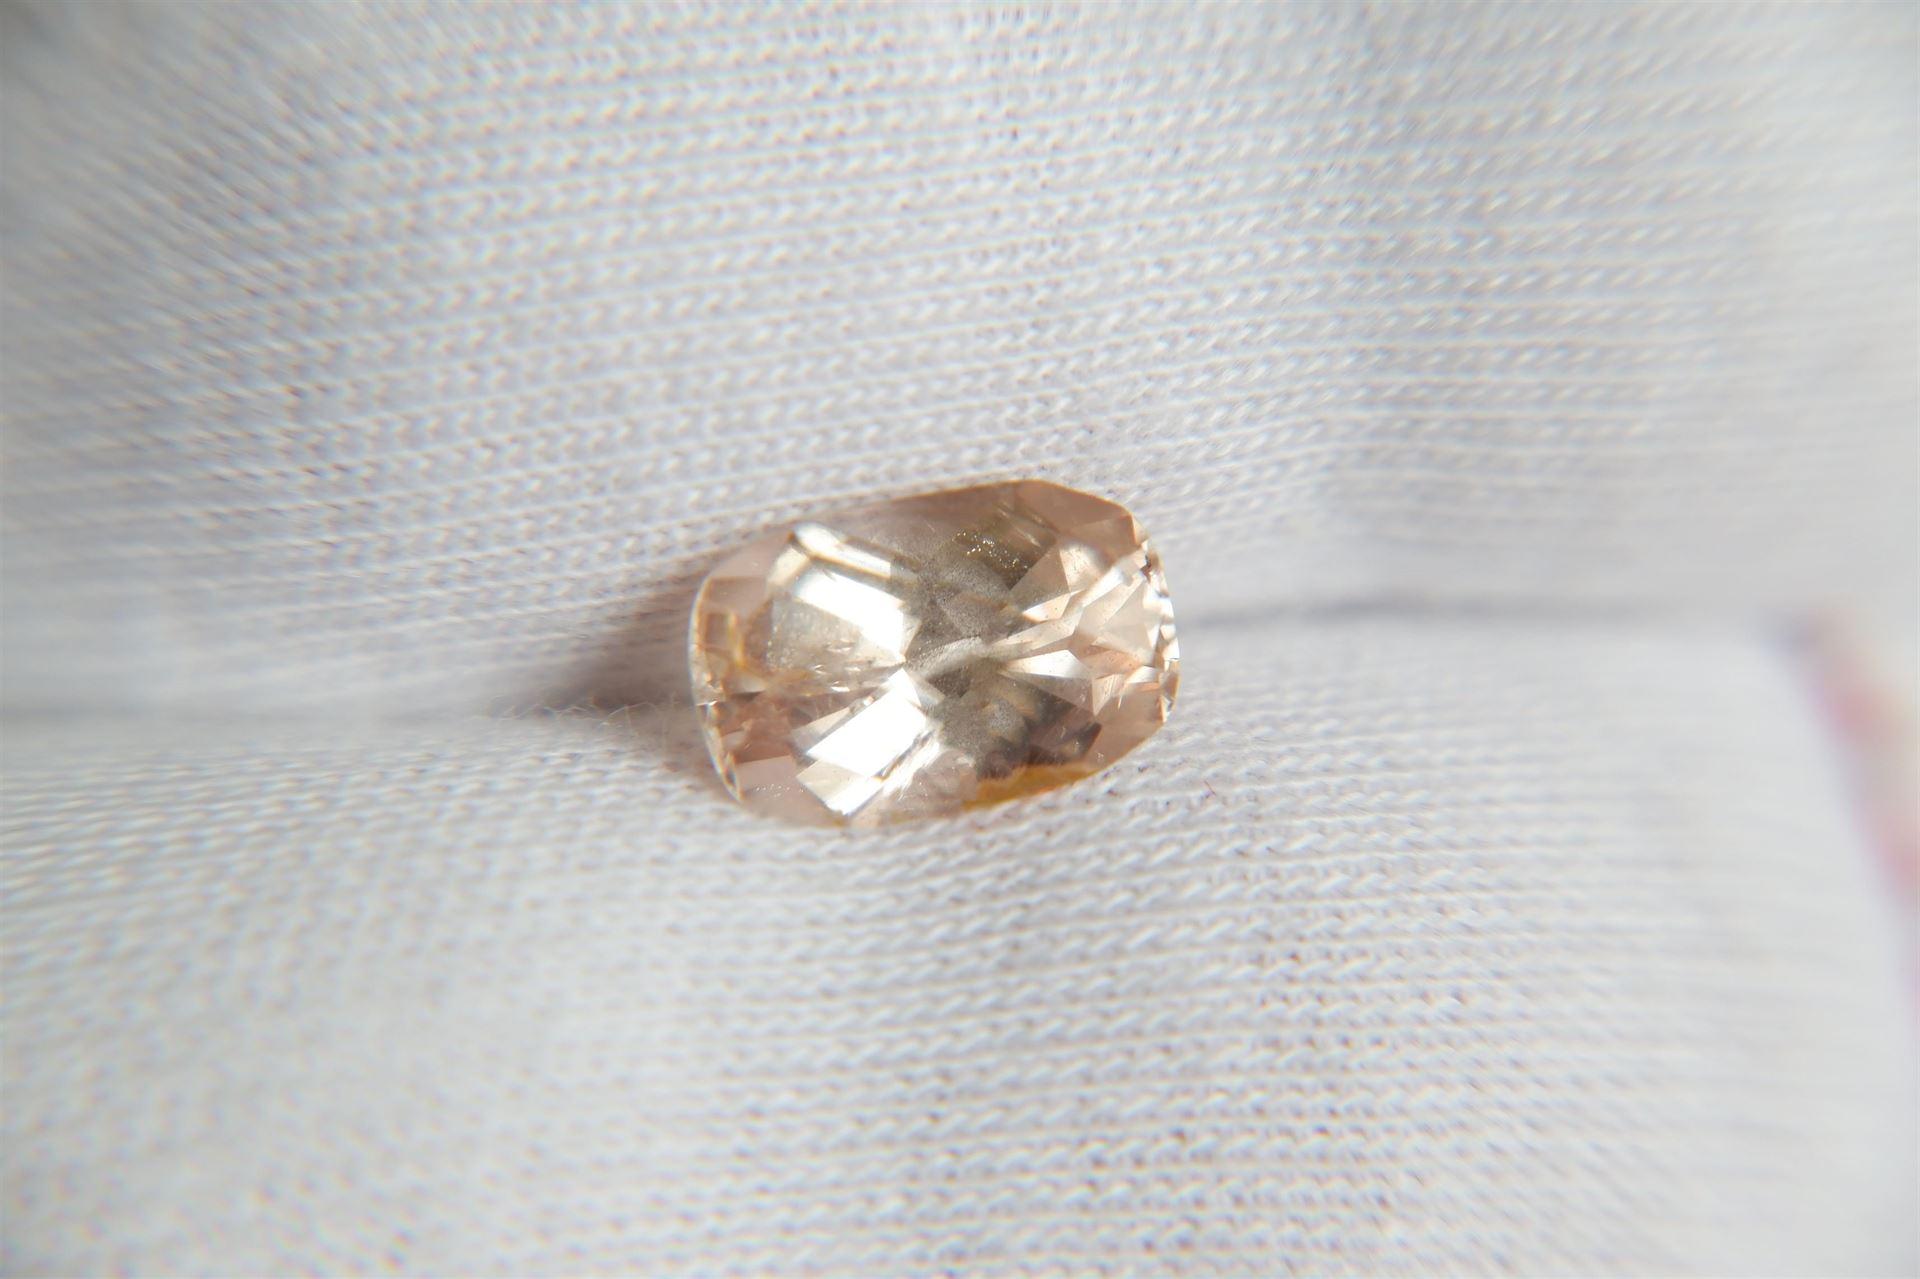 Peach Sapphire is a natural, unheated sapphire from Sri Lanka. This premium cut stone is a beautiful red-orange or orange-red color with excellent clarity and finish. It would make a beautiful ring or jewelry piece for anyone looking for a unique